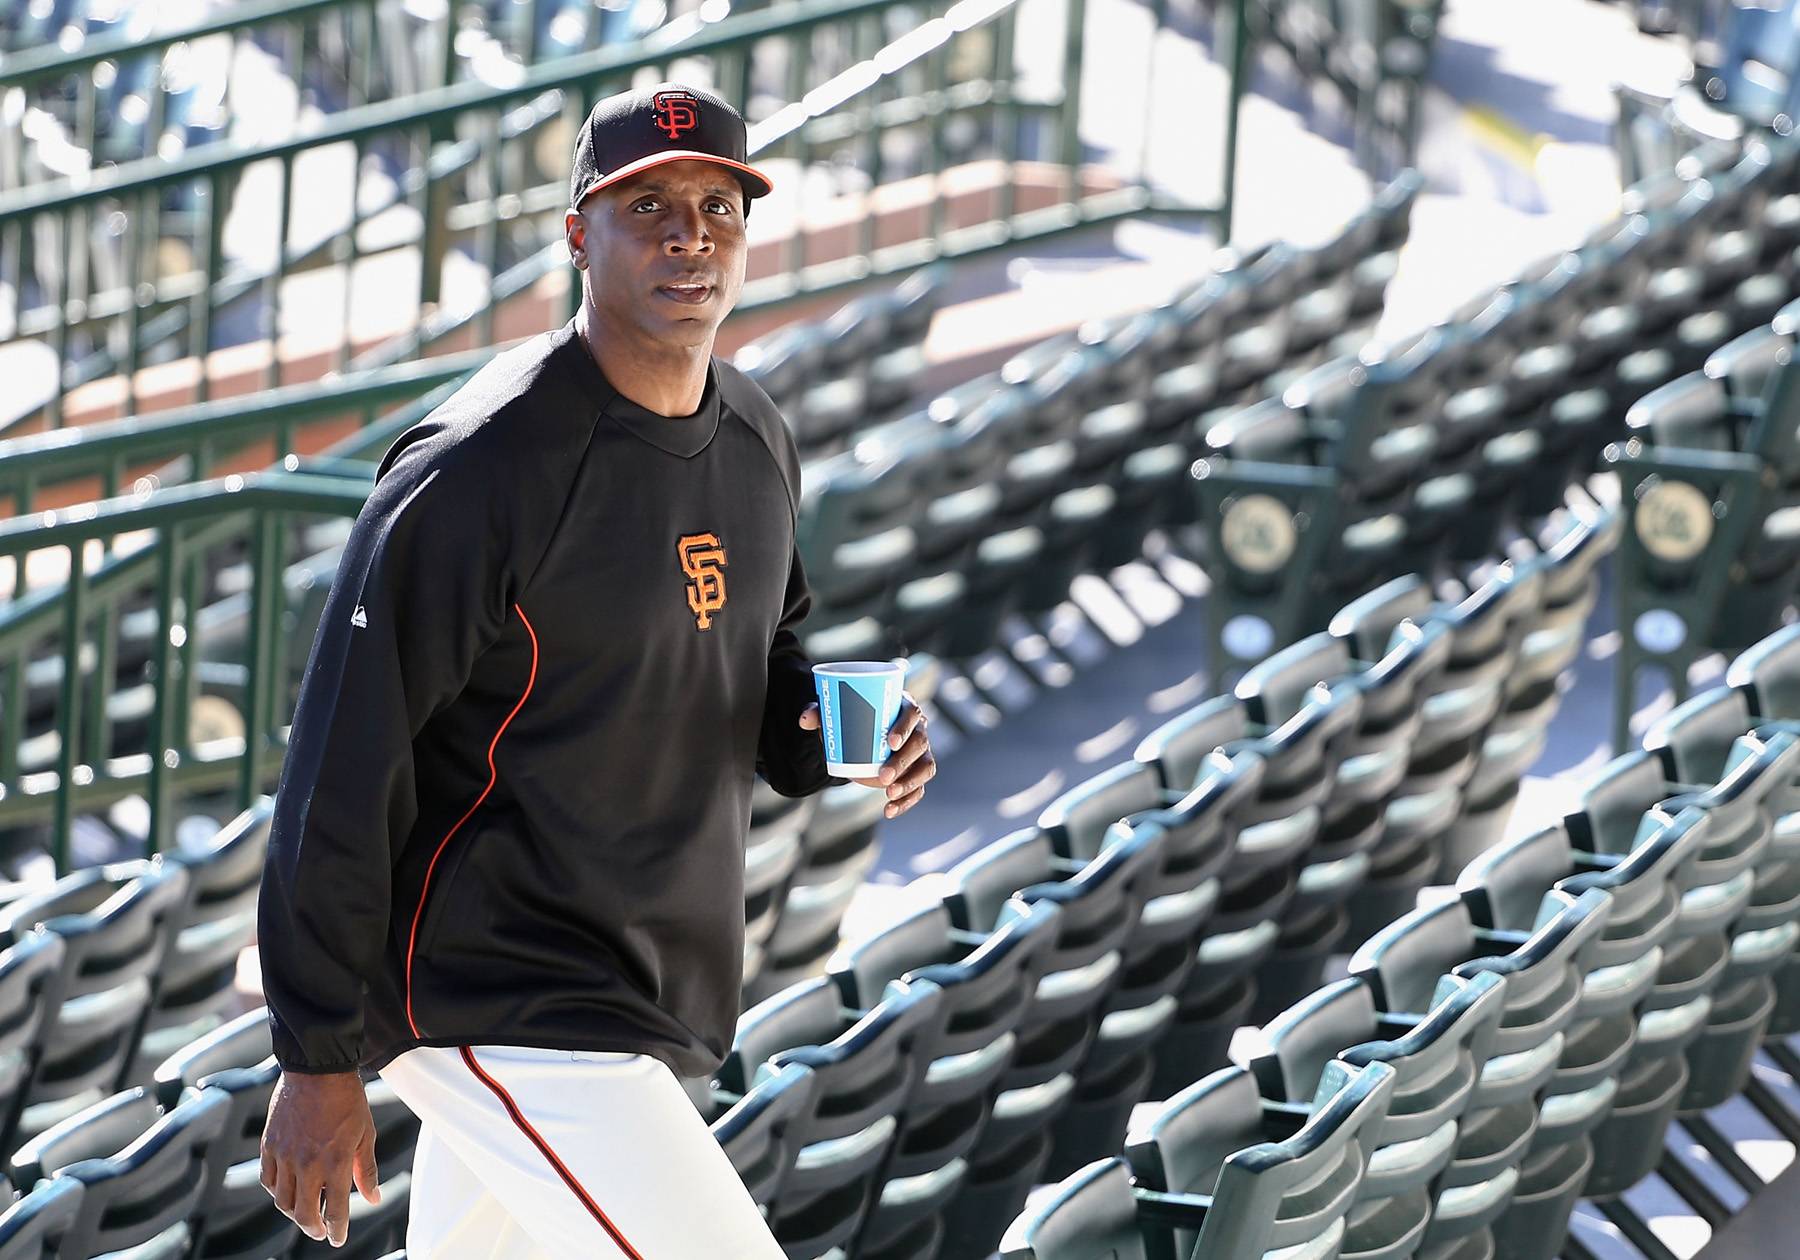 Barry Bonds thinks he belongs in Hall of Fame